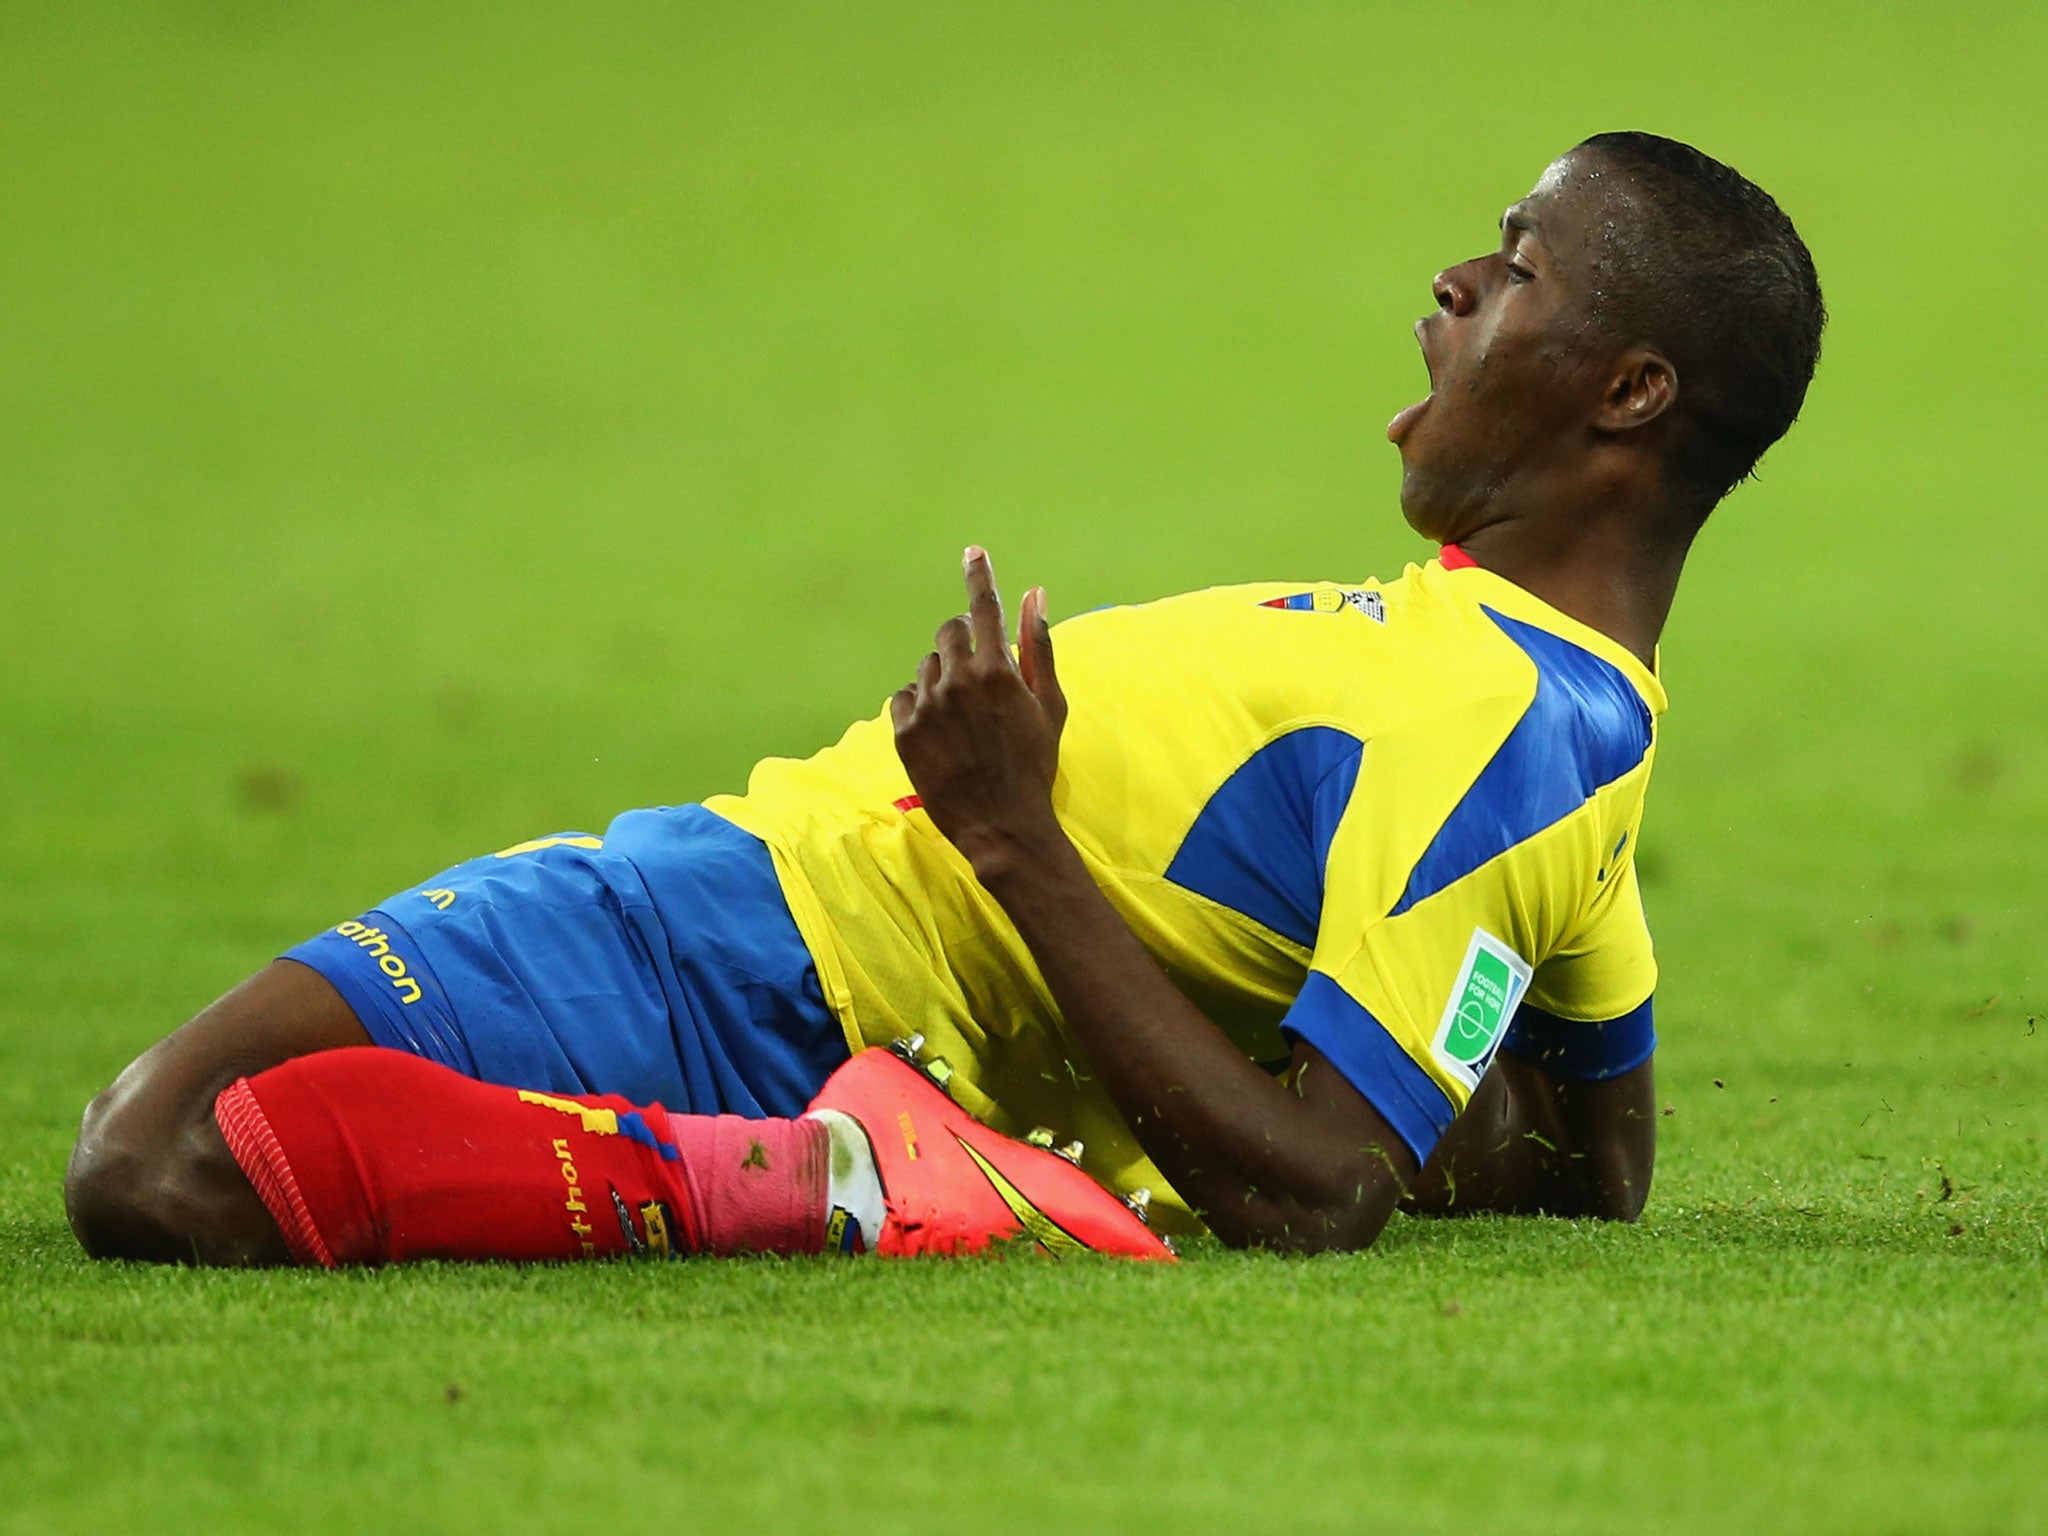 Enner Valencia of Ecuador has joined West Ham for £12m